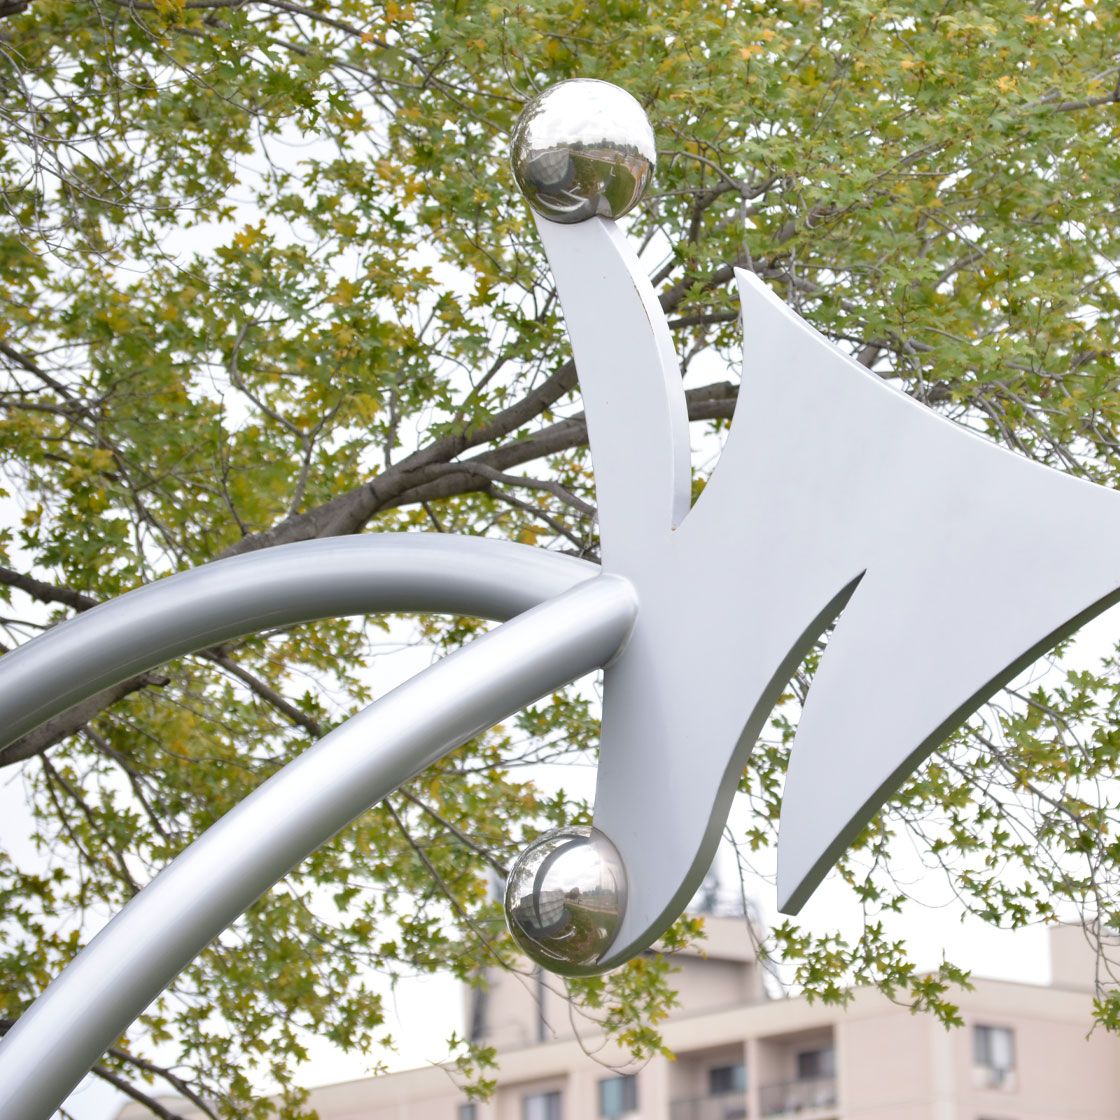 Large-scale metal sculpture in the shape of an arrow